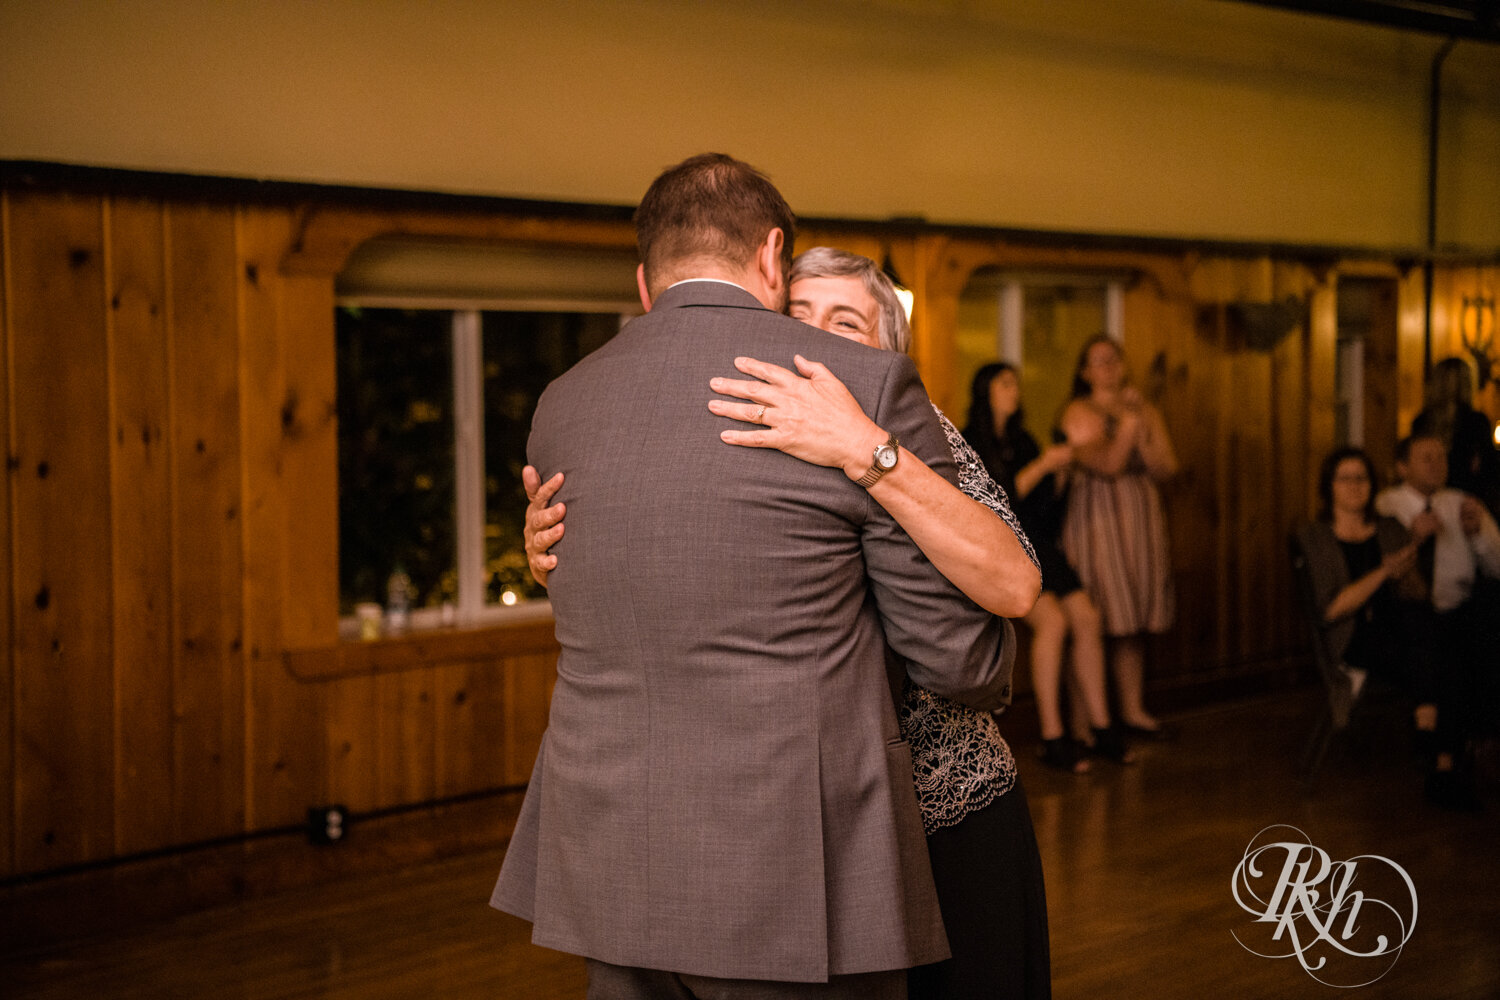 Groom and his mom dance at wedding reception at Kellerman's Event Center in White Bear Lake, Minnesota.